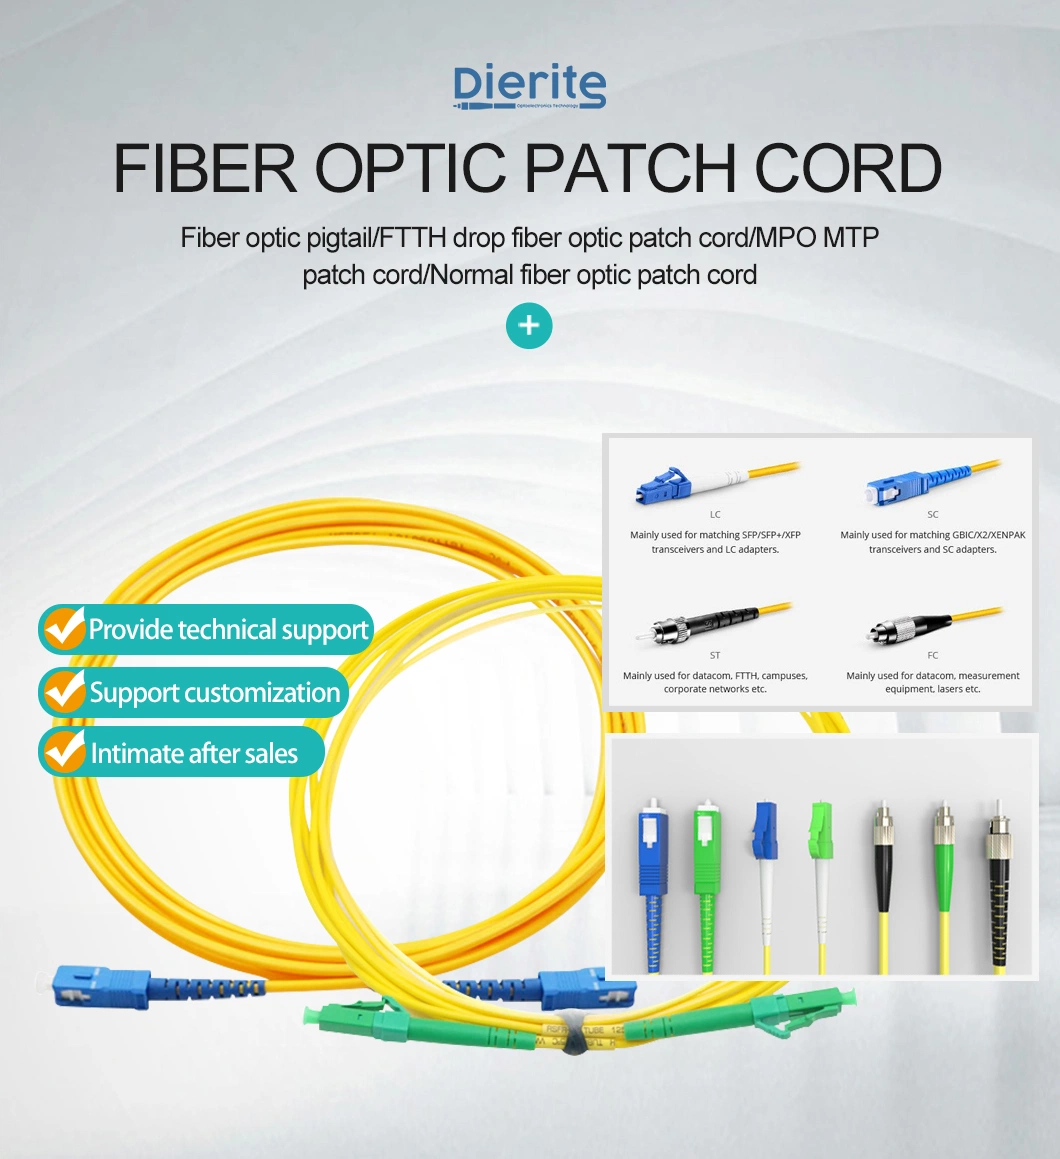 Network Single-Mode/Multi-Mode MPO MTP 0.9mm 2.0mm Optical Fiber Patch Cord Jumper Cable Us Conec MTP-Female or Male Connector